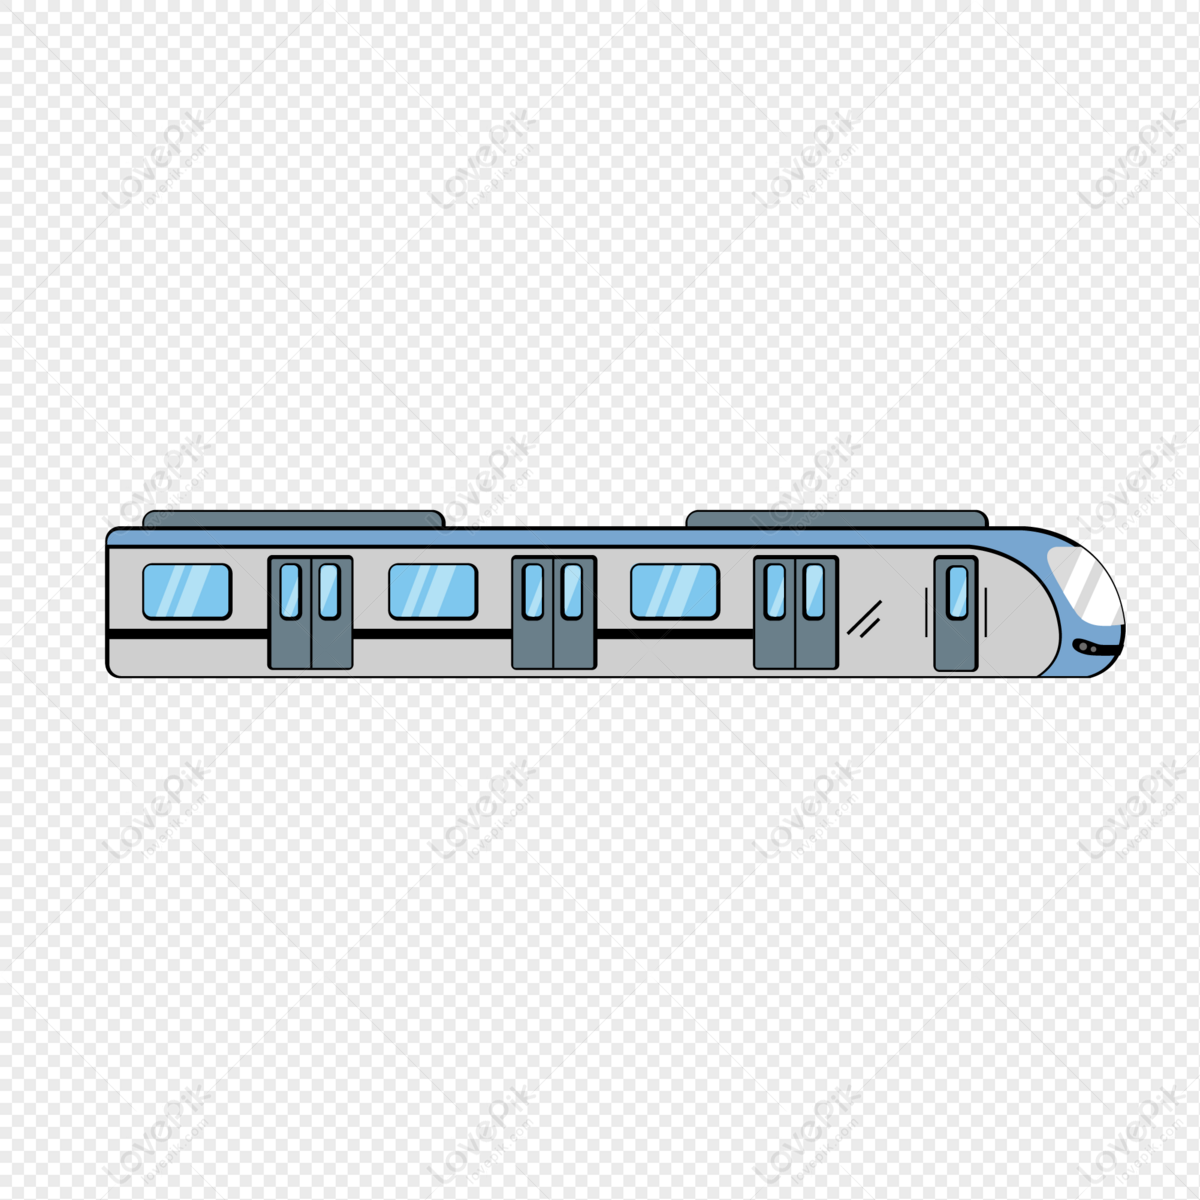 Train Logo Images PNG Transparent Background, Free Download #48001 -  FreeIconsPNG